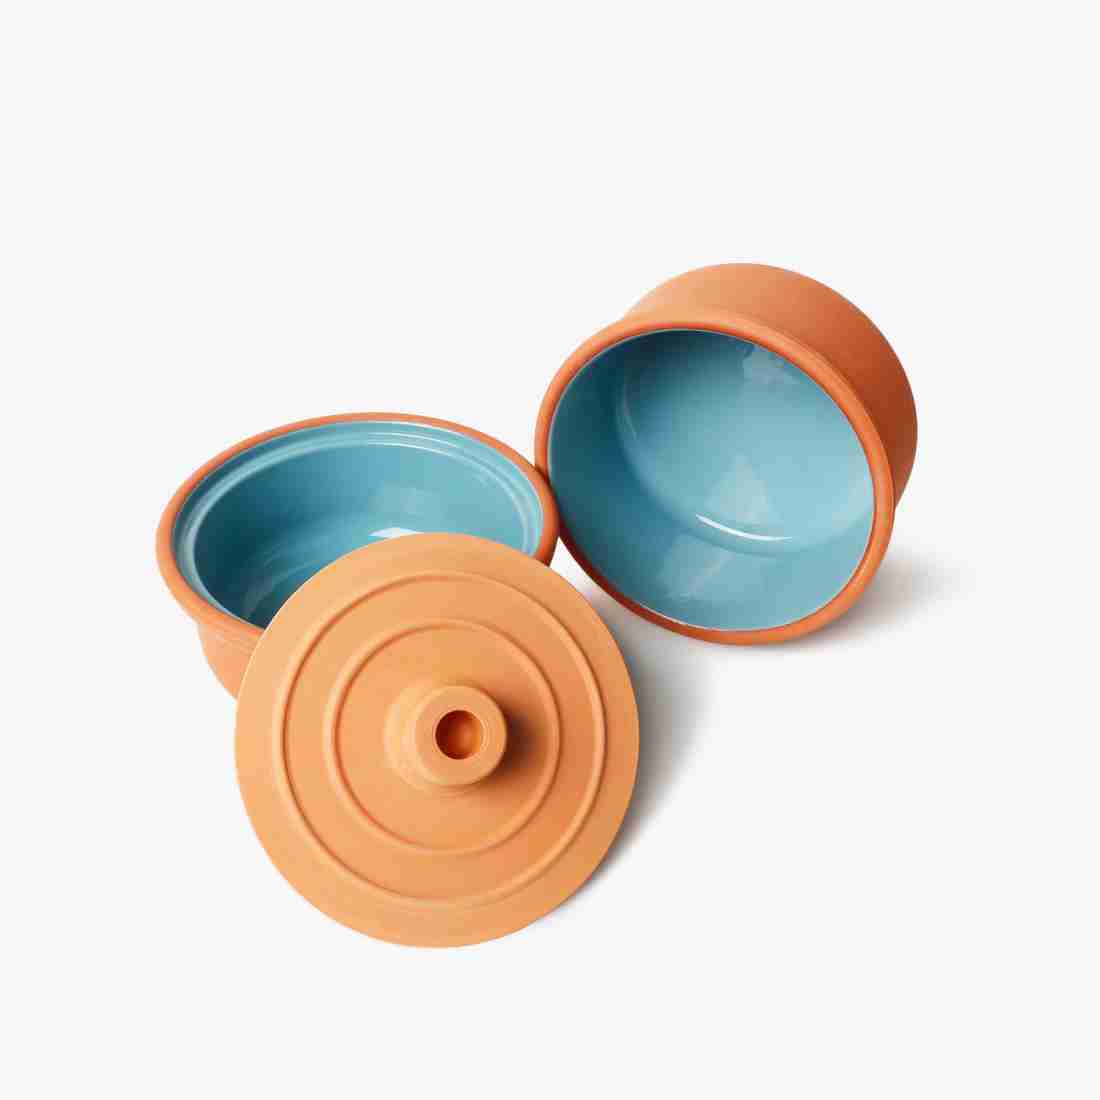 CASADECOR Terracotta Casserole Set with Cover Lid Pack of 2 Cook